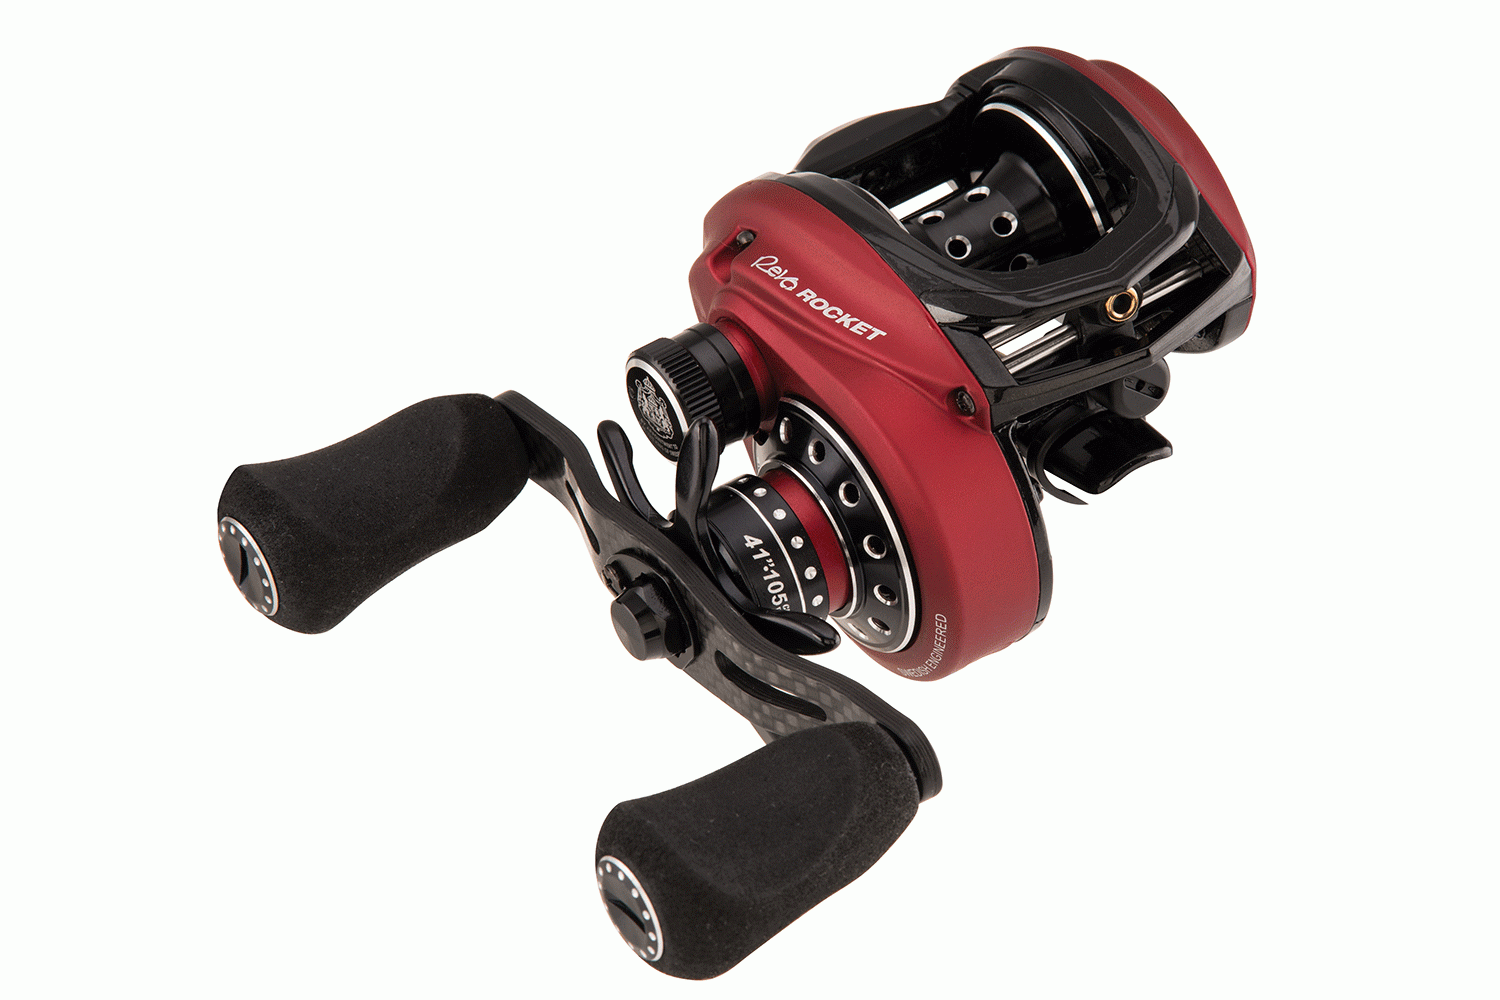 <p><b>Abu Garcia Revo Rocket, $299.95</b></p> The new Abu Garcia Revo Rocket packs a punch when it comes to delivering high speed performance. Featuring 10.1:1 rocket gear ratio, delivering 41 inches of line per turn, the new Revo Rocket gives anglers speed, compact design and power all in one package.  <br> <a href=